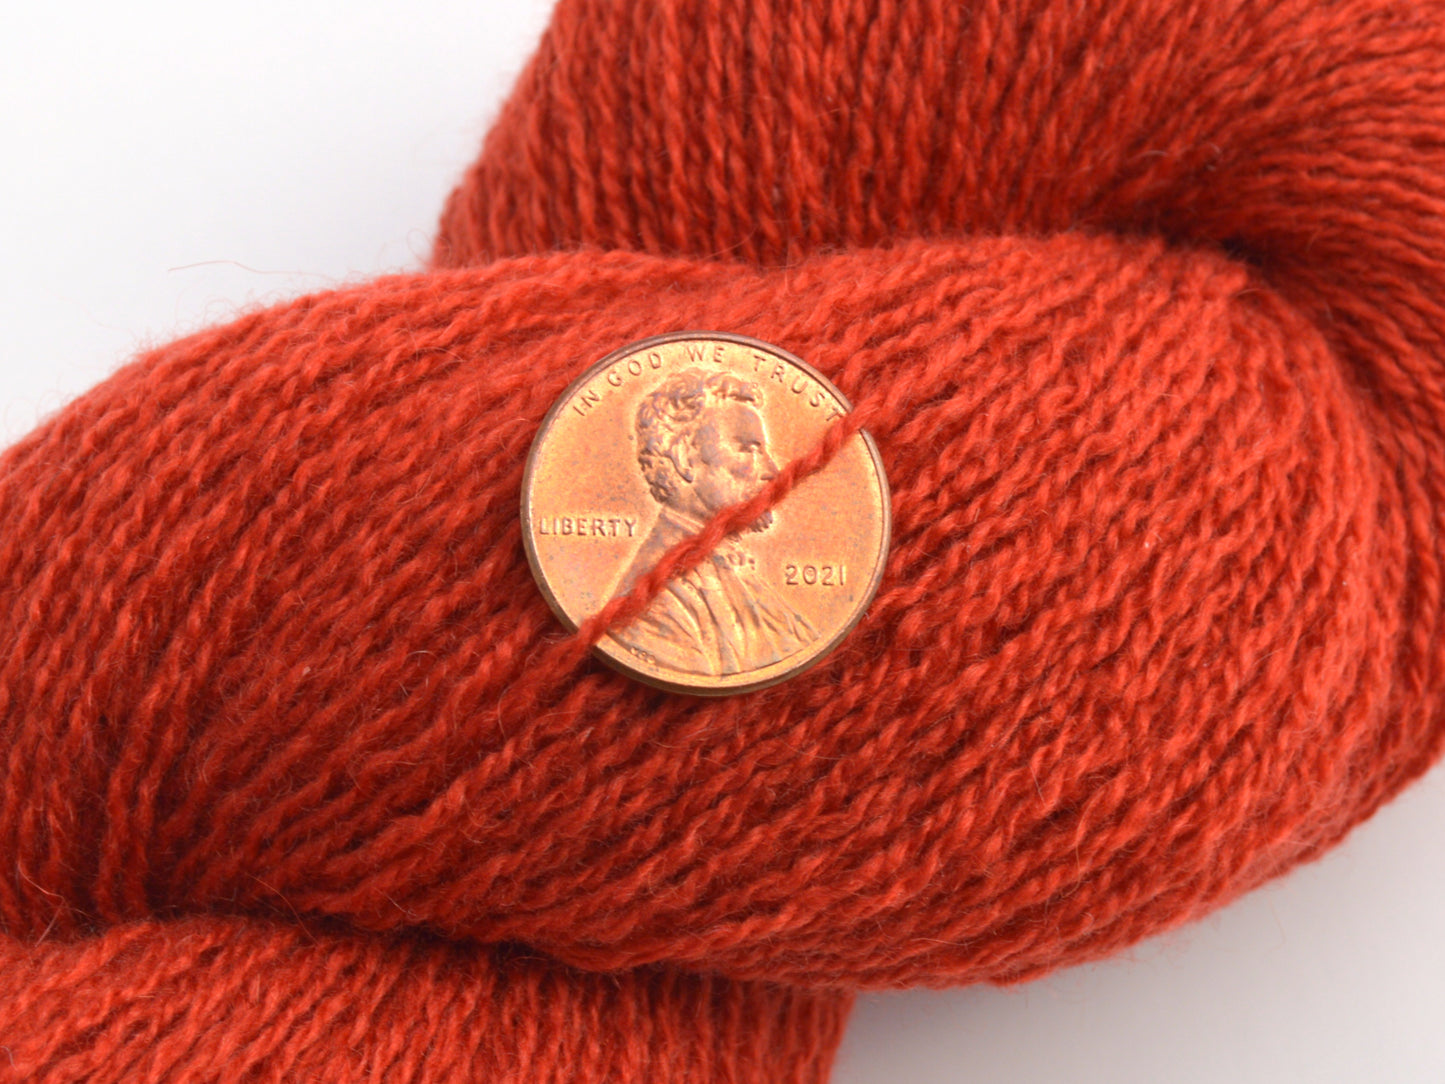 Heavy Lace Weight Recycled Cashmere Yarn in Rusty Red